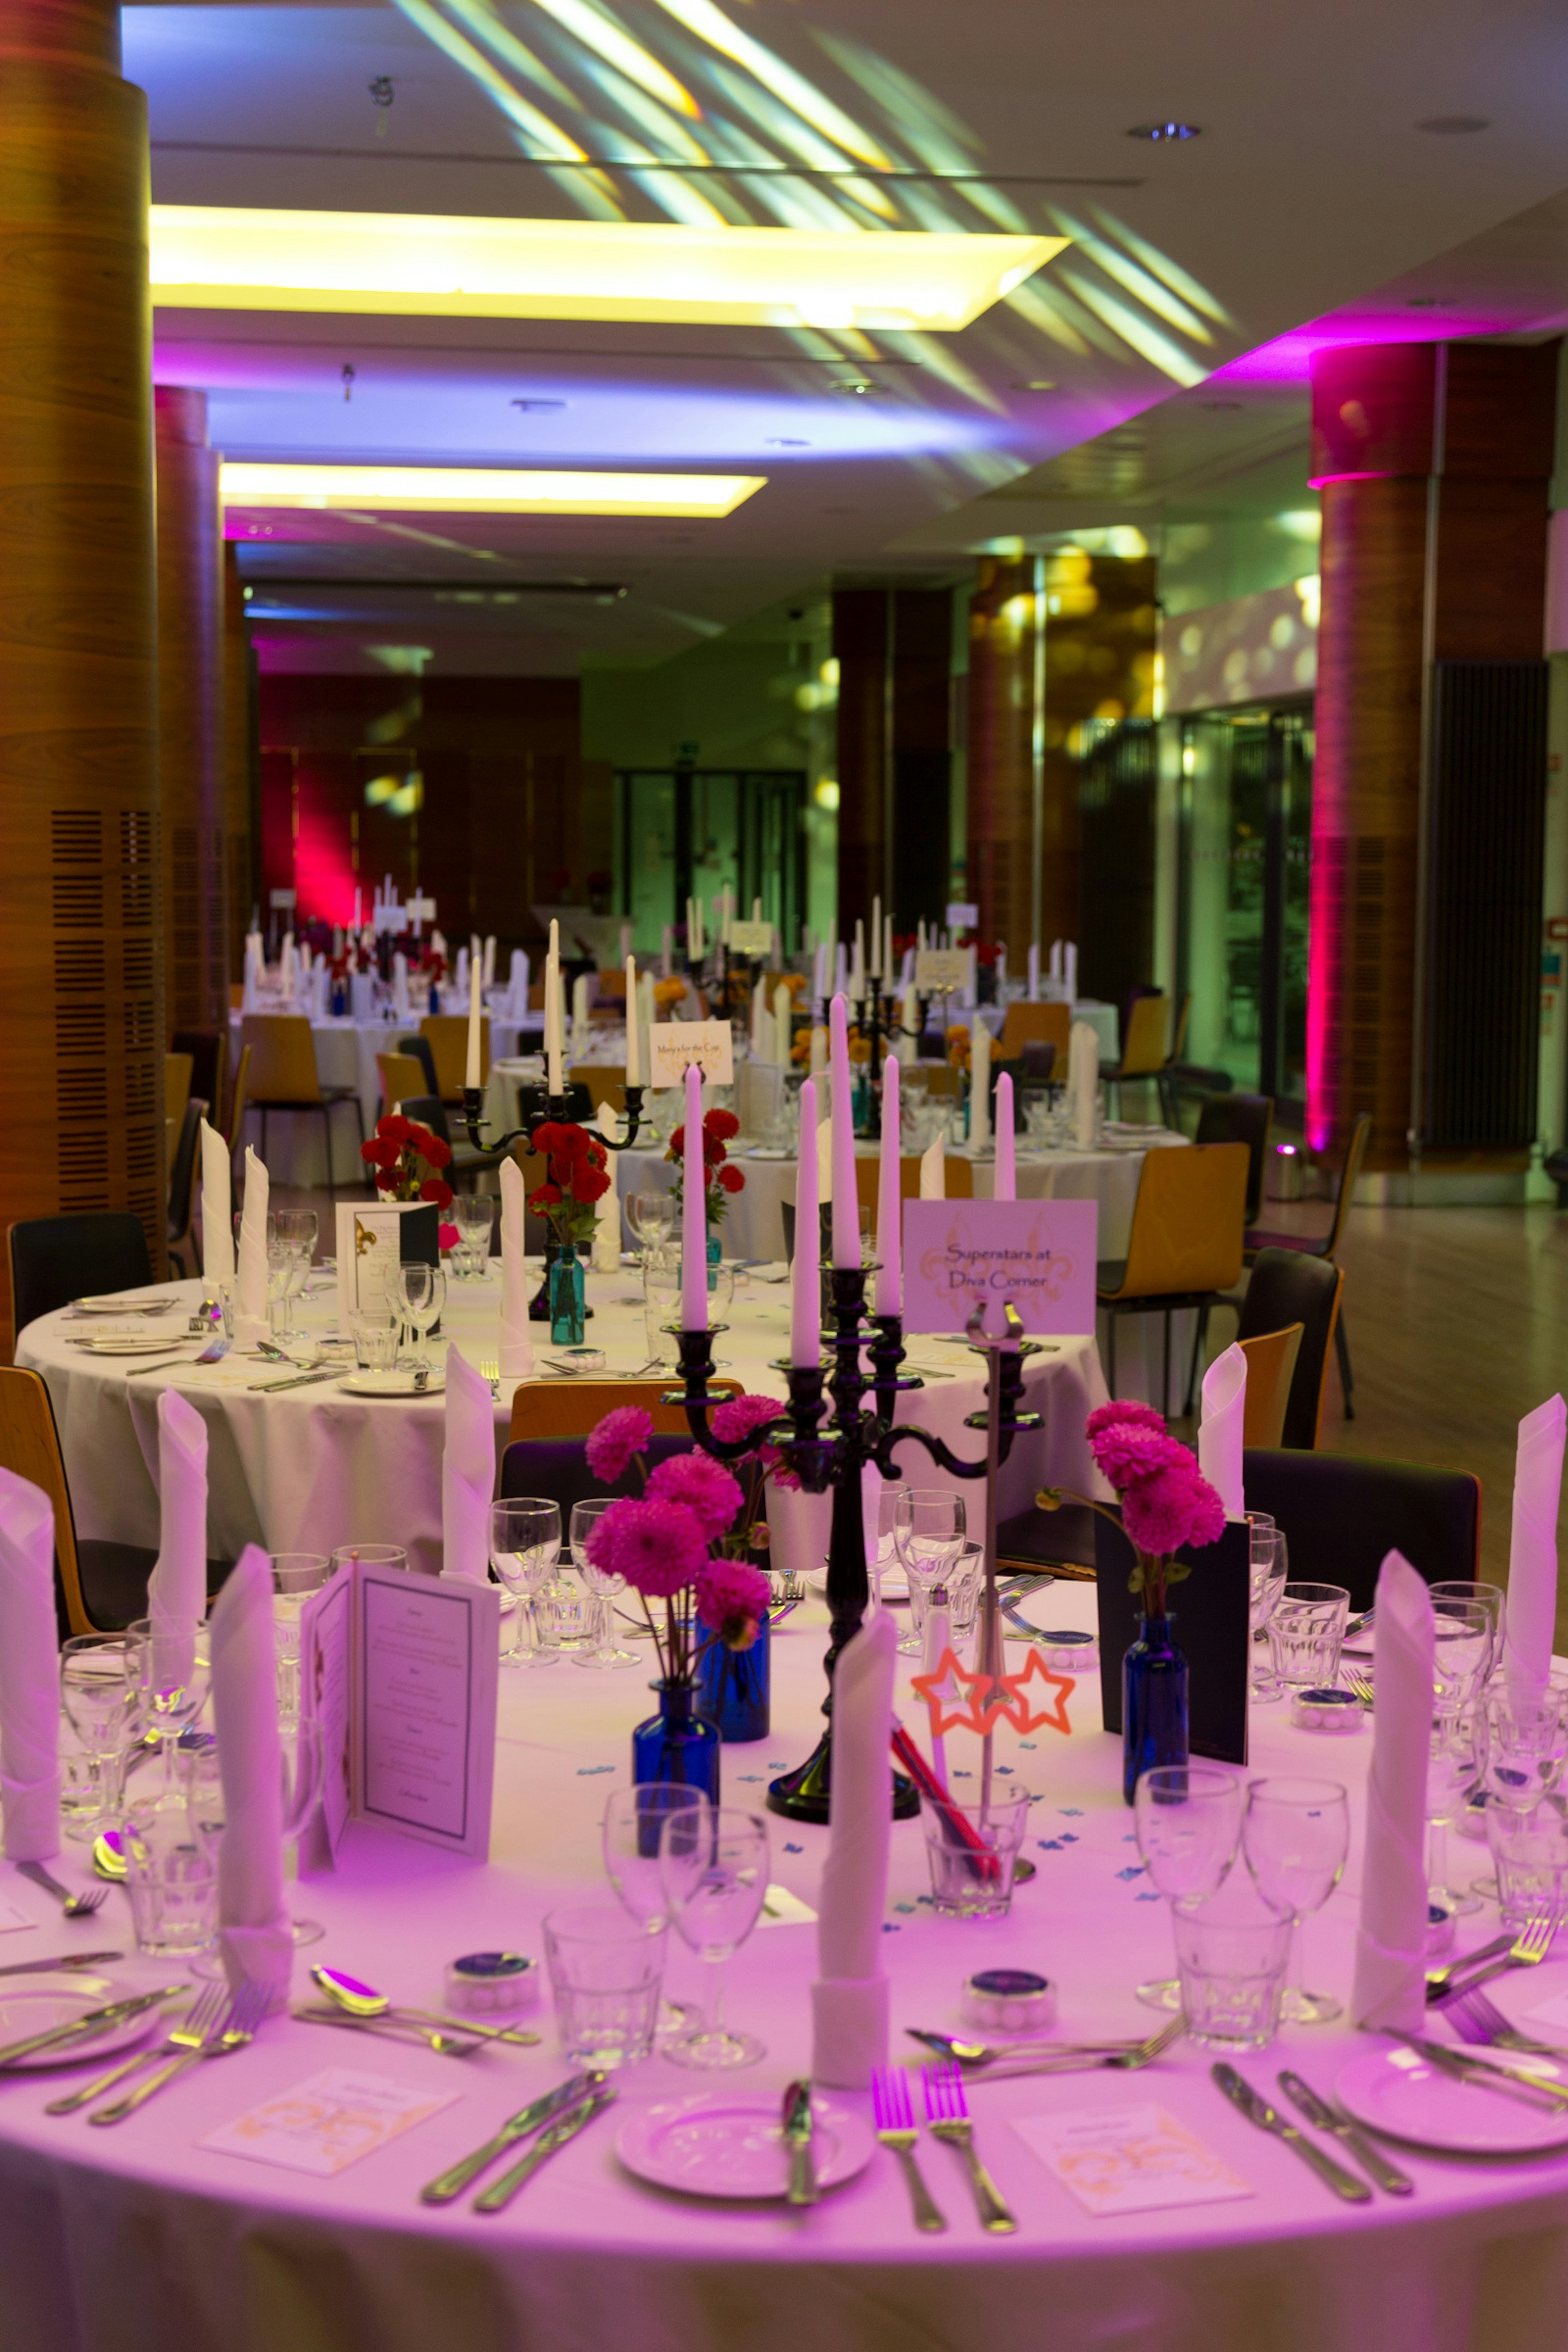 Unique Christmas Party Venues - Imperial Venues - Imperial College South Kensington - Events in Queen's Tower Rooms - Banner